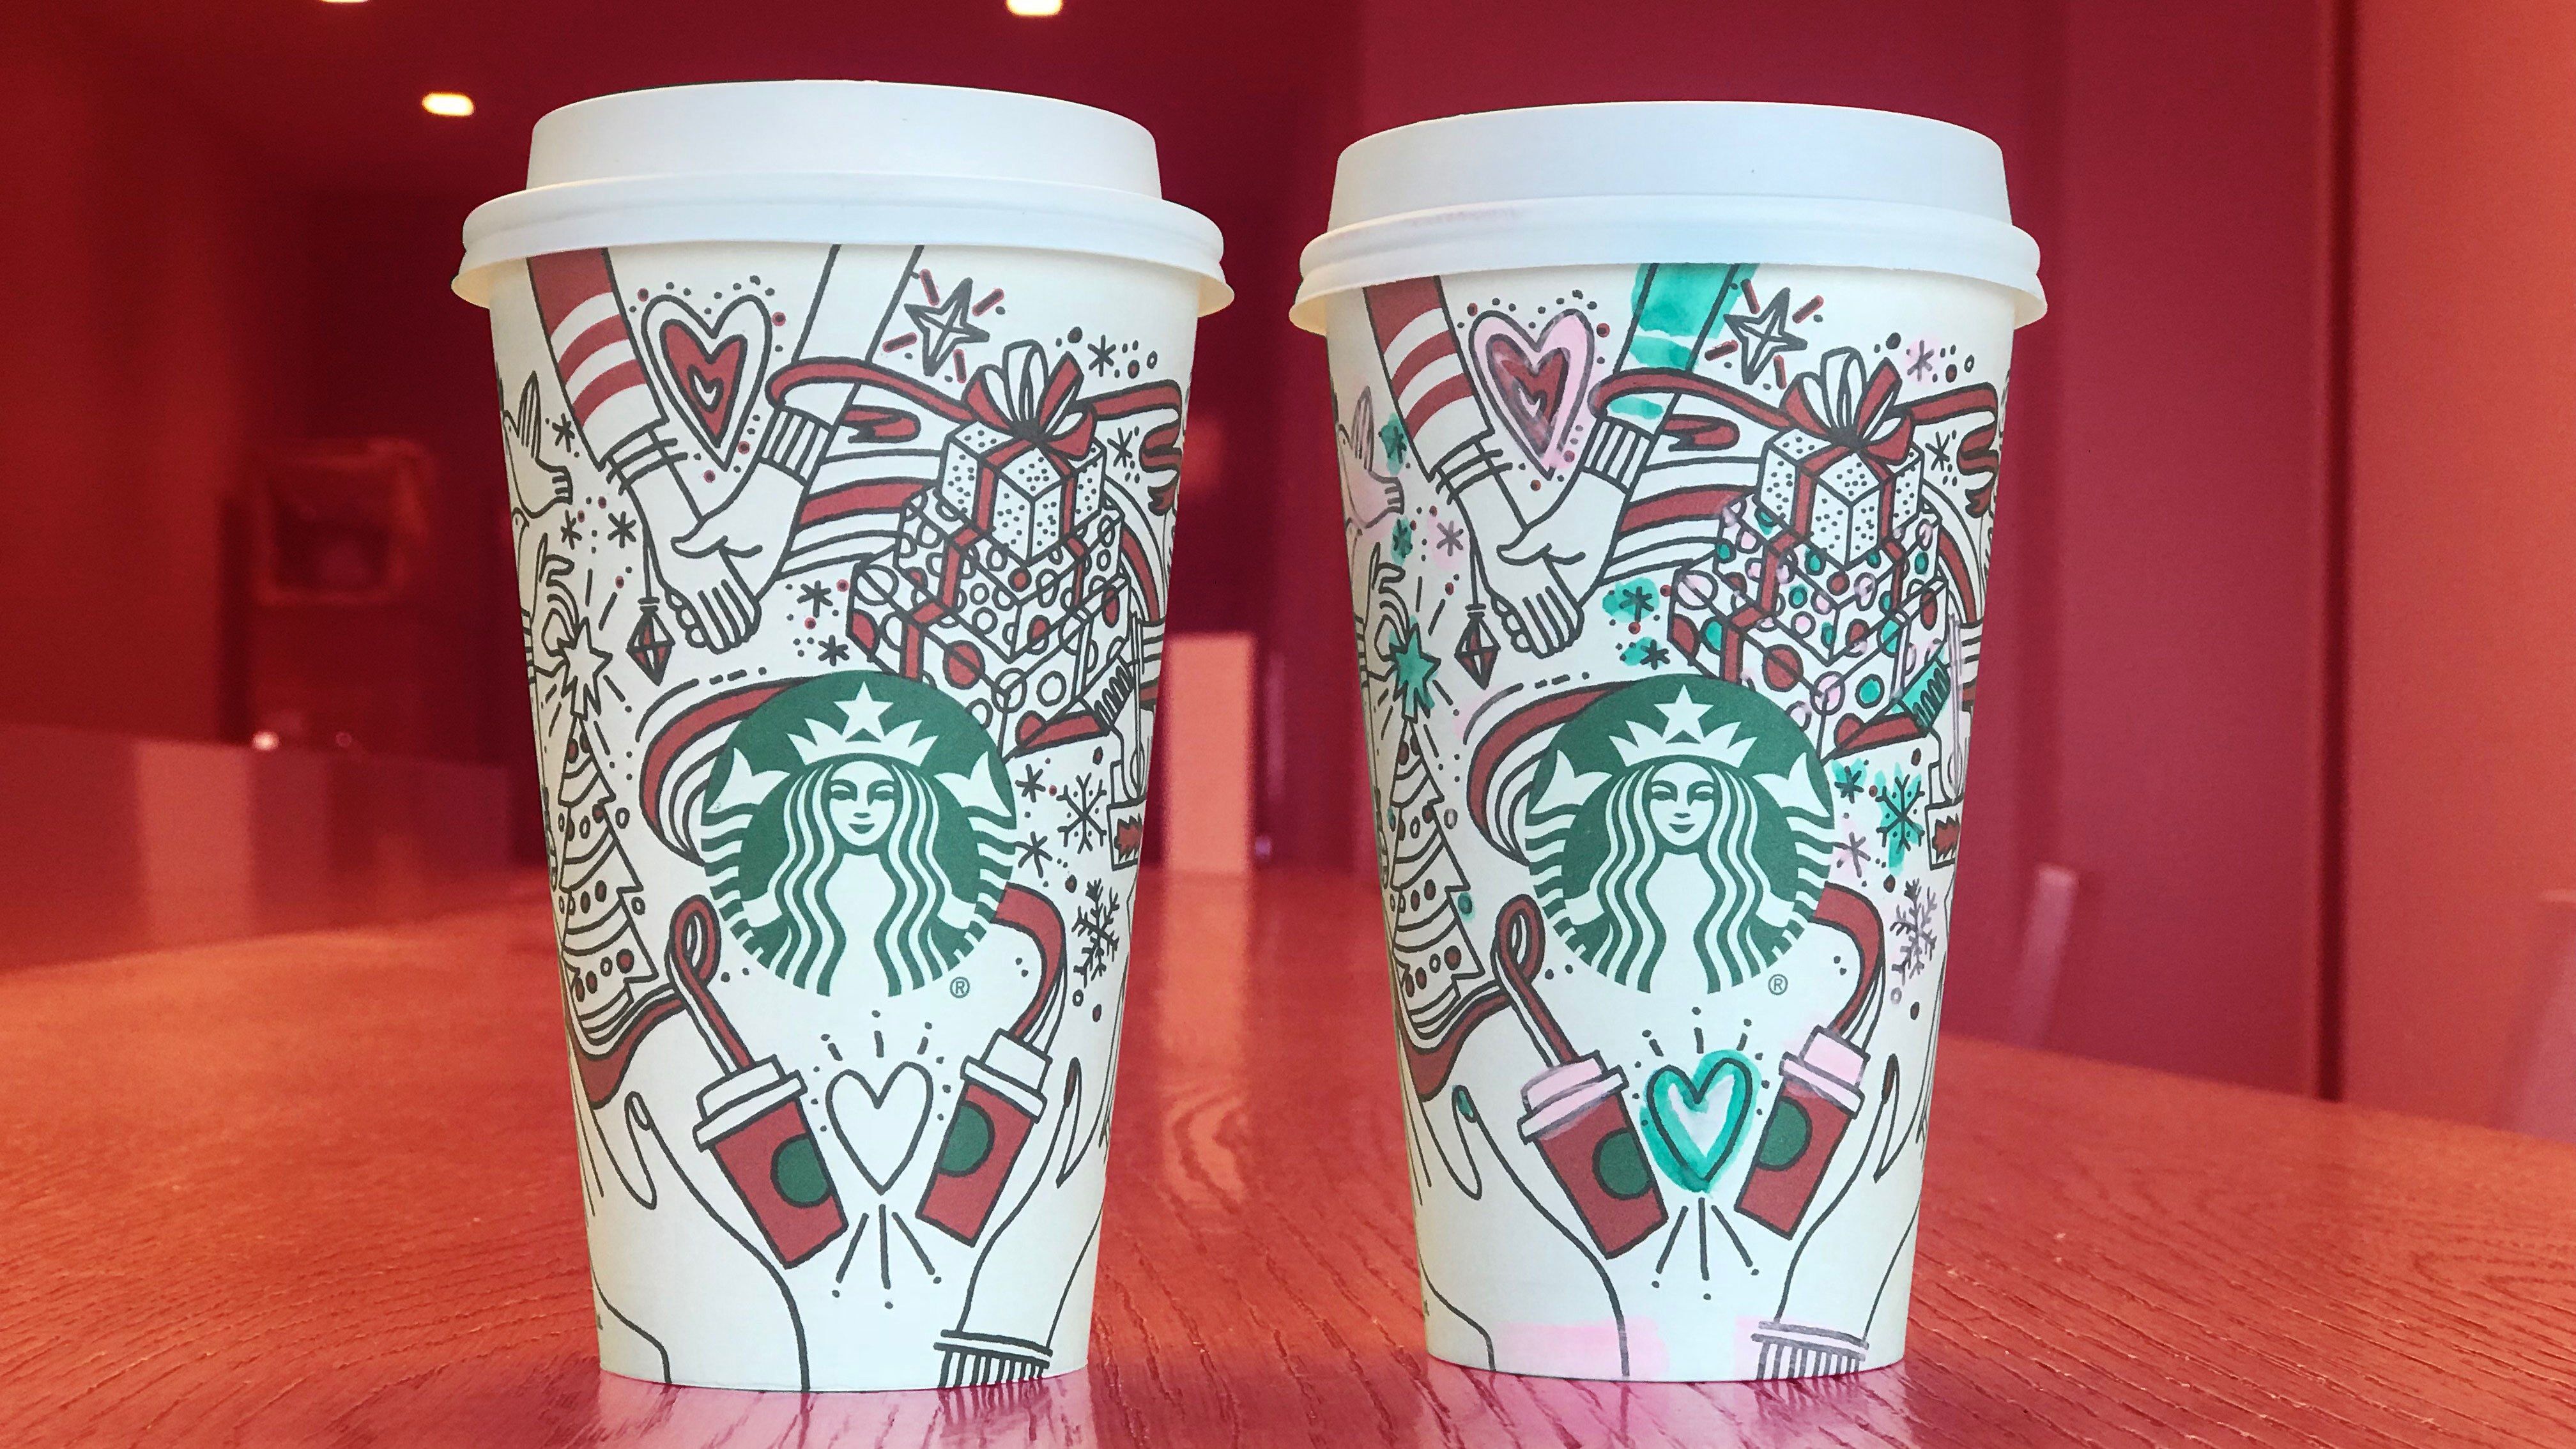 Cute Starbucks Wallpaper with Holiday Cups Close Up Photo Wallpaper. Wallpaper Download. High Resolution Wallpaper